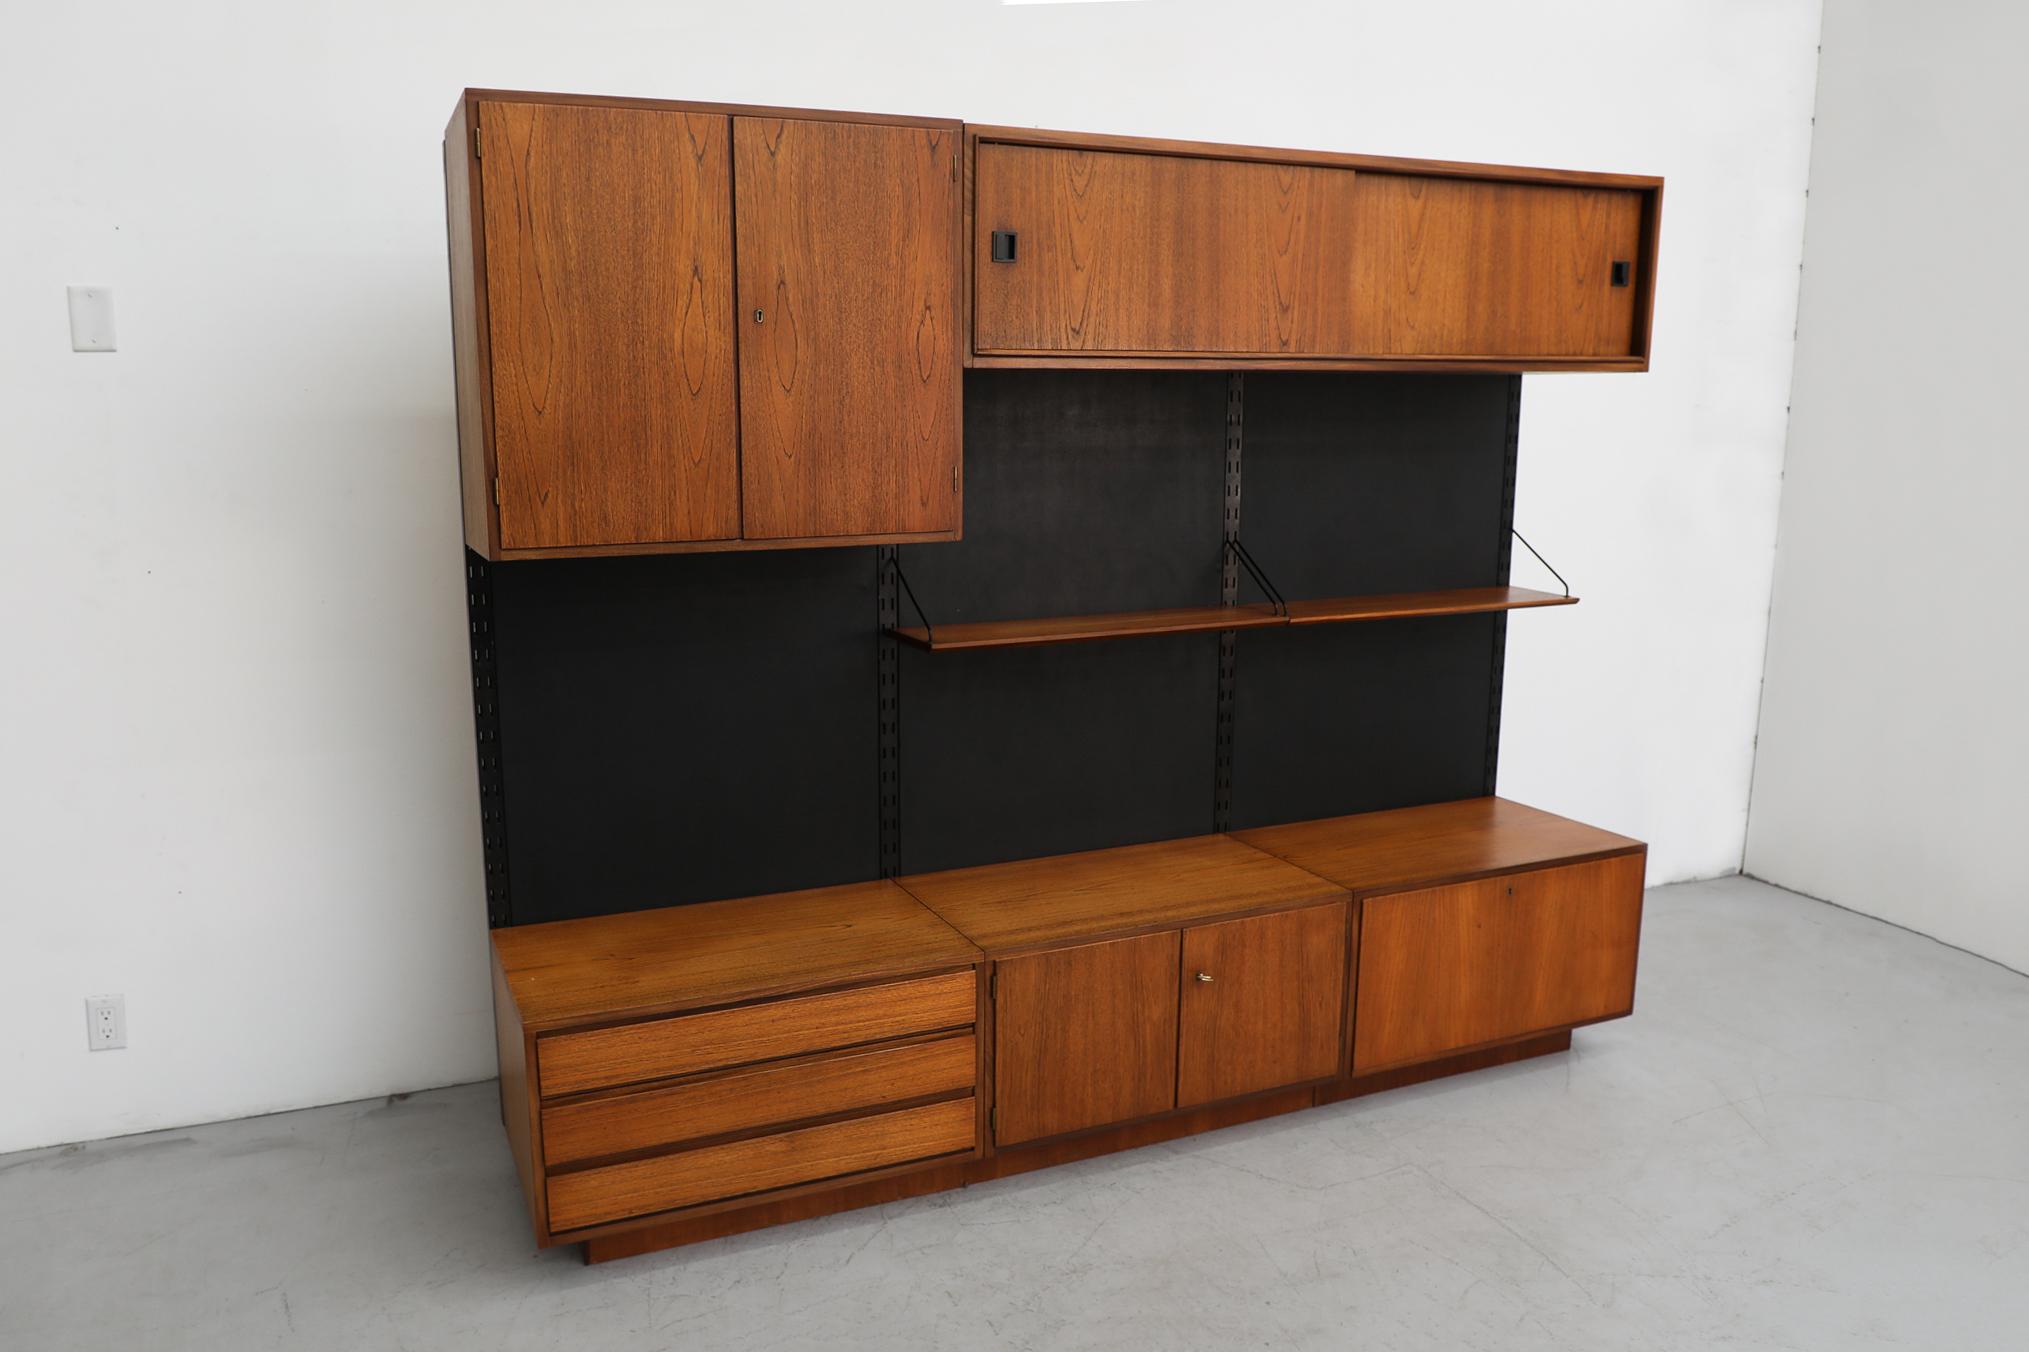 Rare midcentury free standing teak Royal System wall unit by Poul Cadovius. This modular piece has three connecting black vinyl back boards with risers on each side. The system includes two shelves, and five cabinets including some with locking